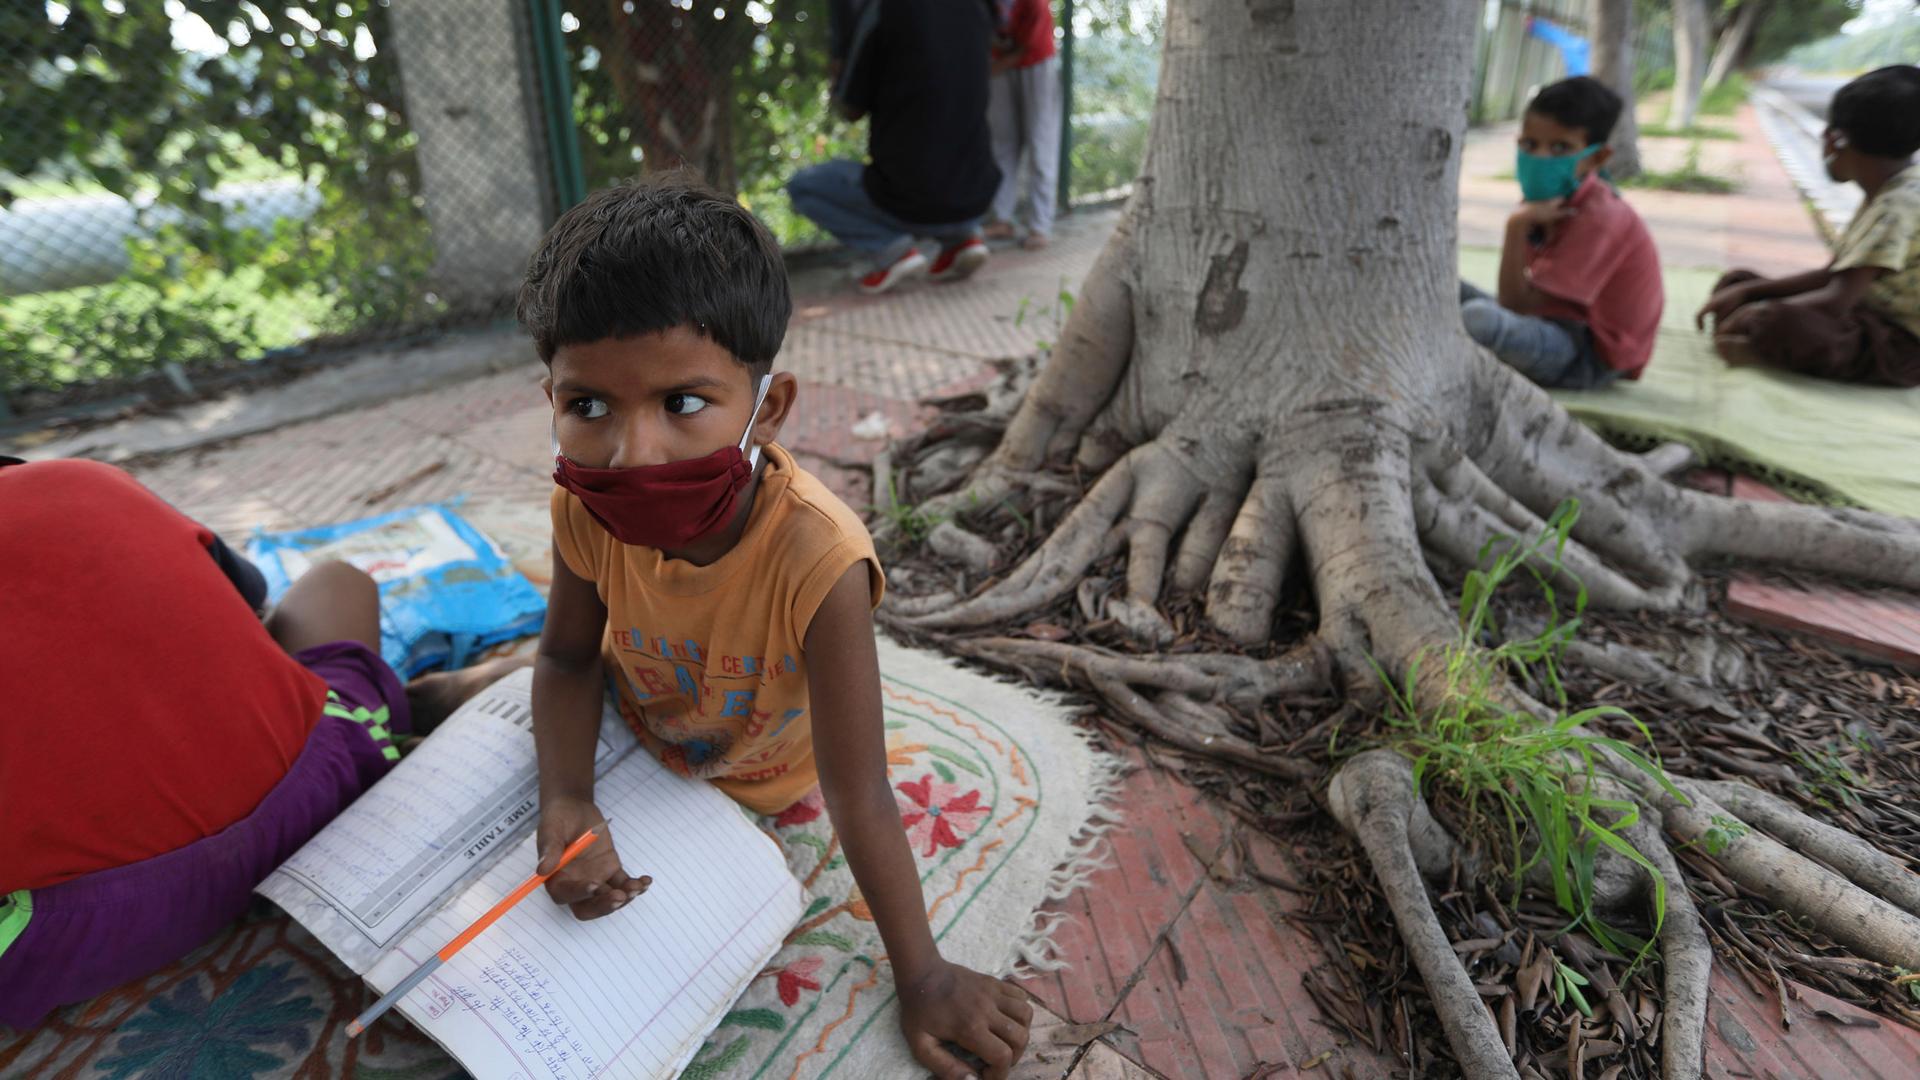 A young boy is shown wearing a red mask and holding a pencil while sitting on a mat next to a tree outside for school.